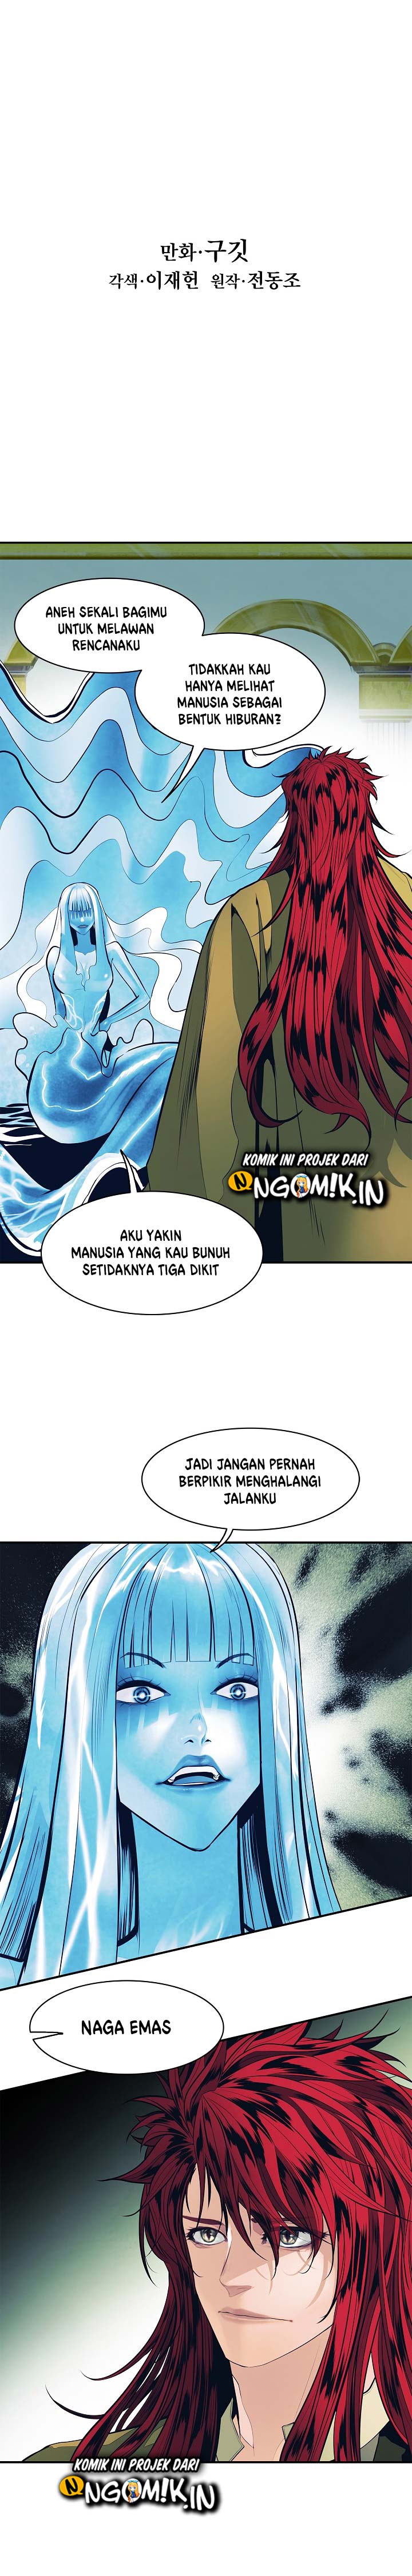 MookHyang – Dark Lady Chapter 63